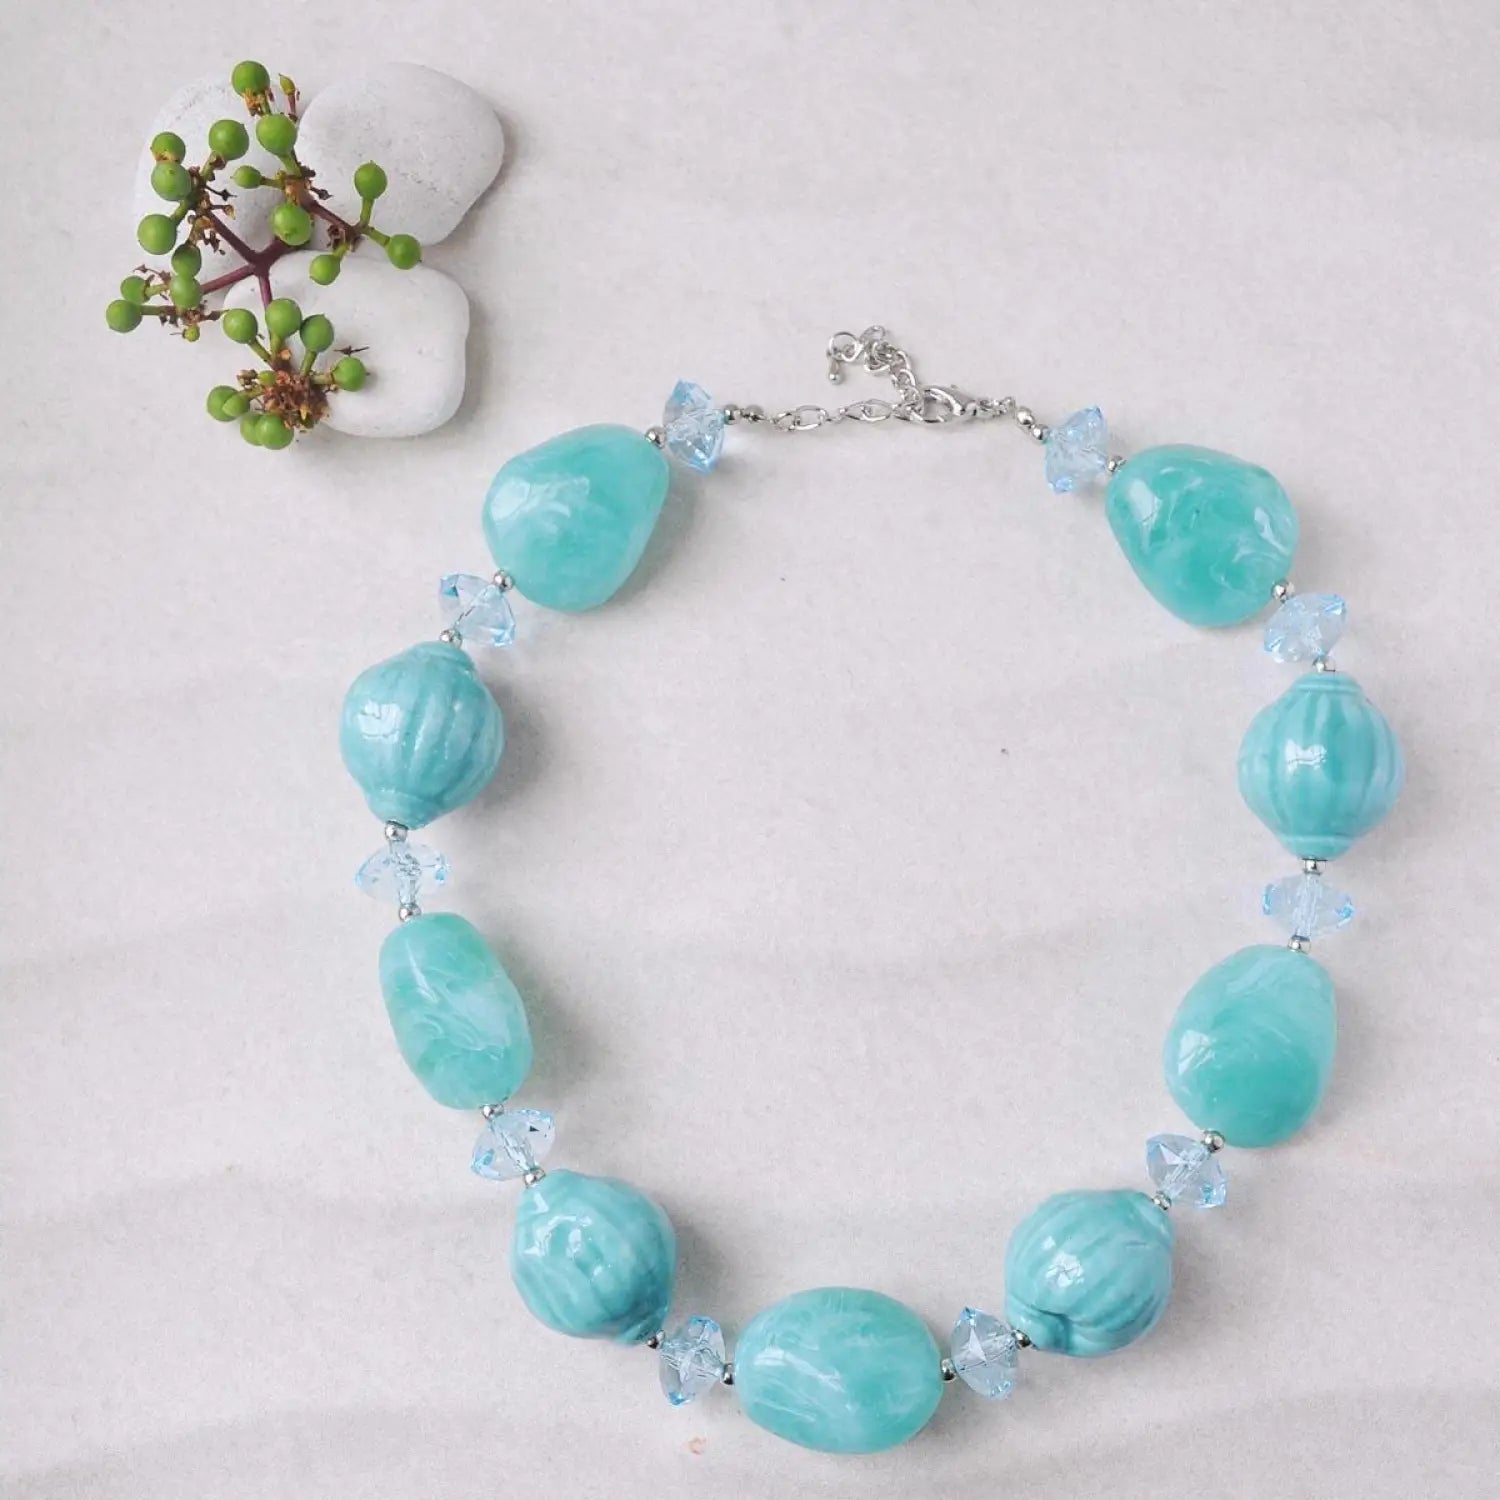 Chunky beads statement necklace with blue beads and silver clasp